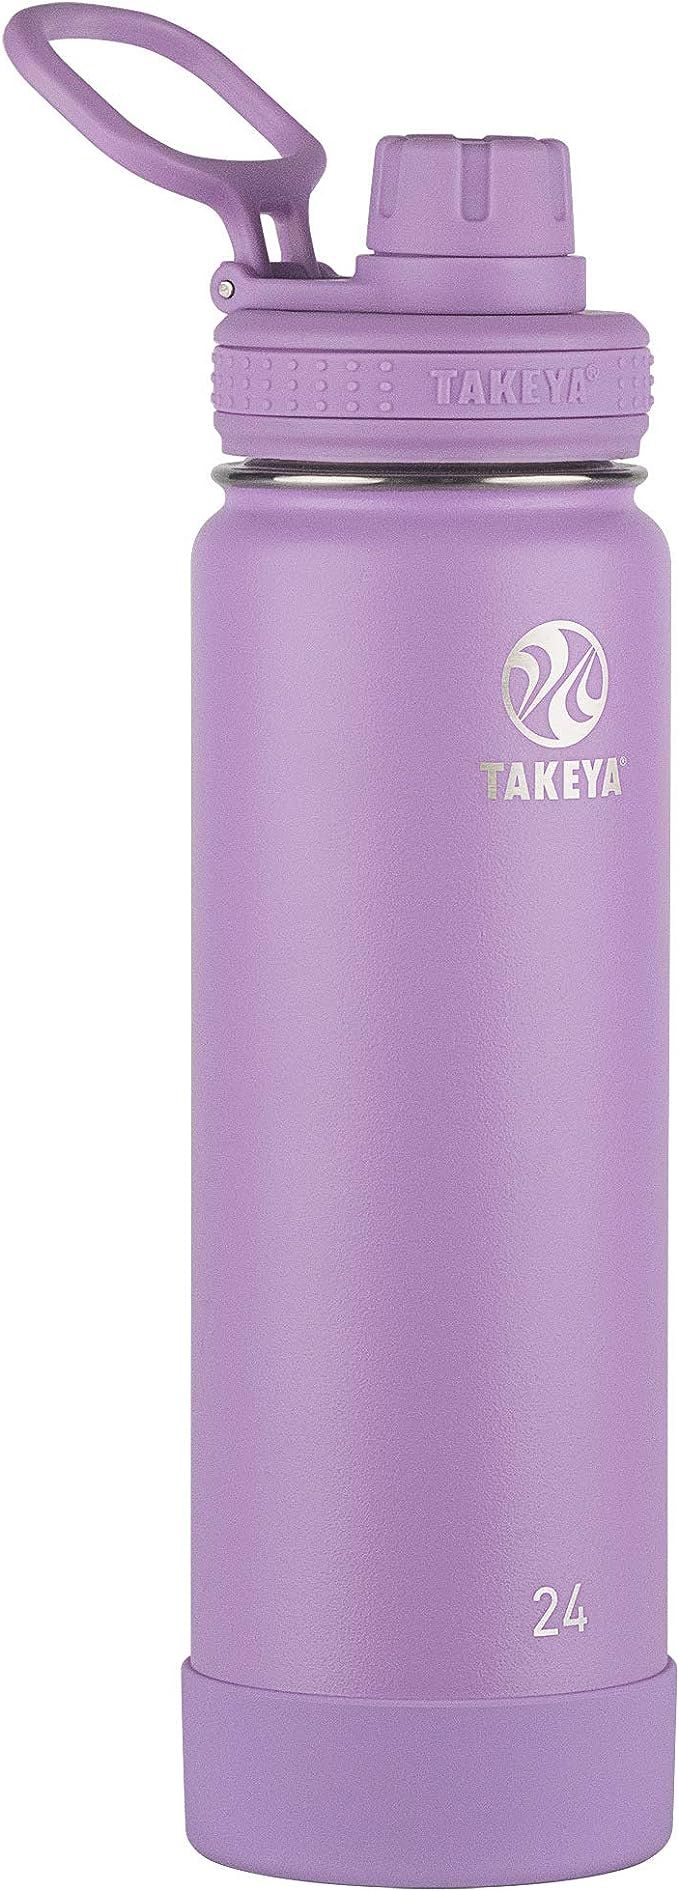 Takeya Actives Insulated Stainless Steel Water Bottle with Spout Lid, 24 Ounce, Lilac | Amazon (US)